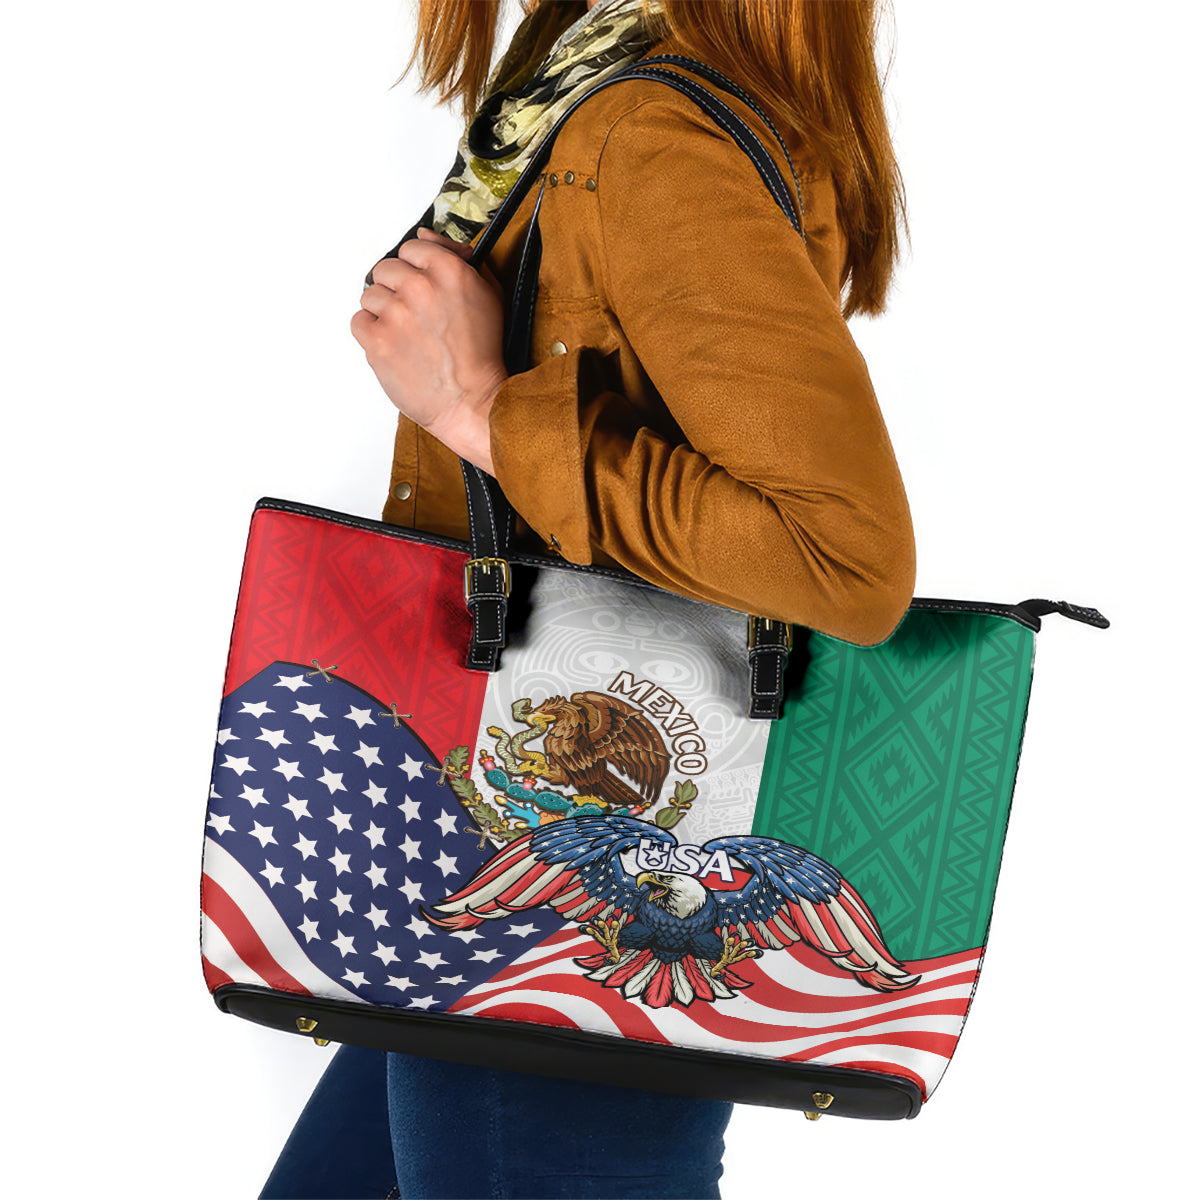 United States And Mexico Leather Tote Bag USA Eagle With Mexican Aztec